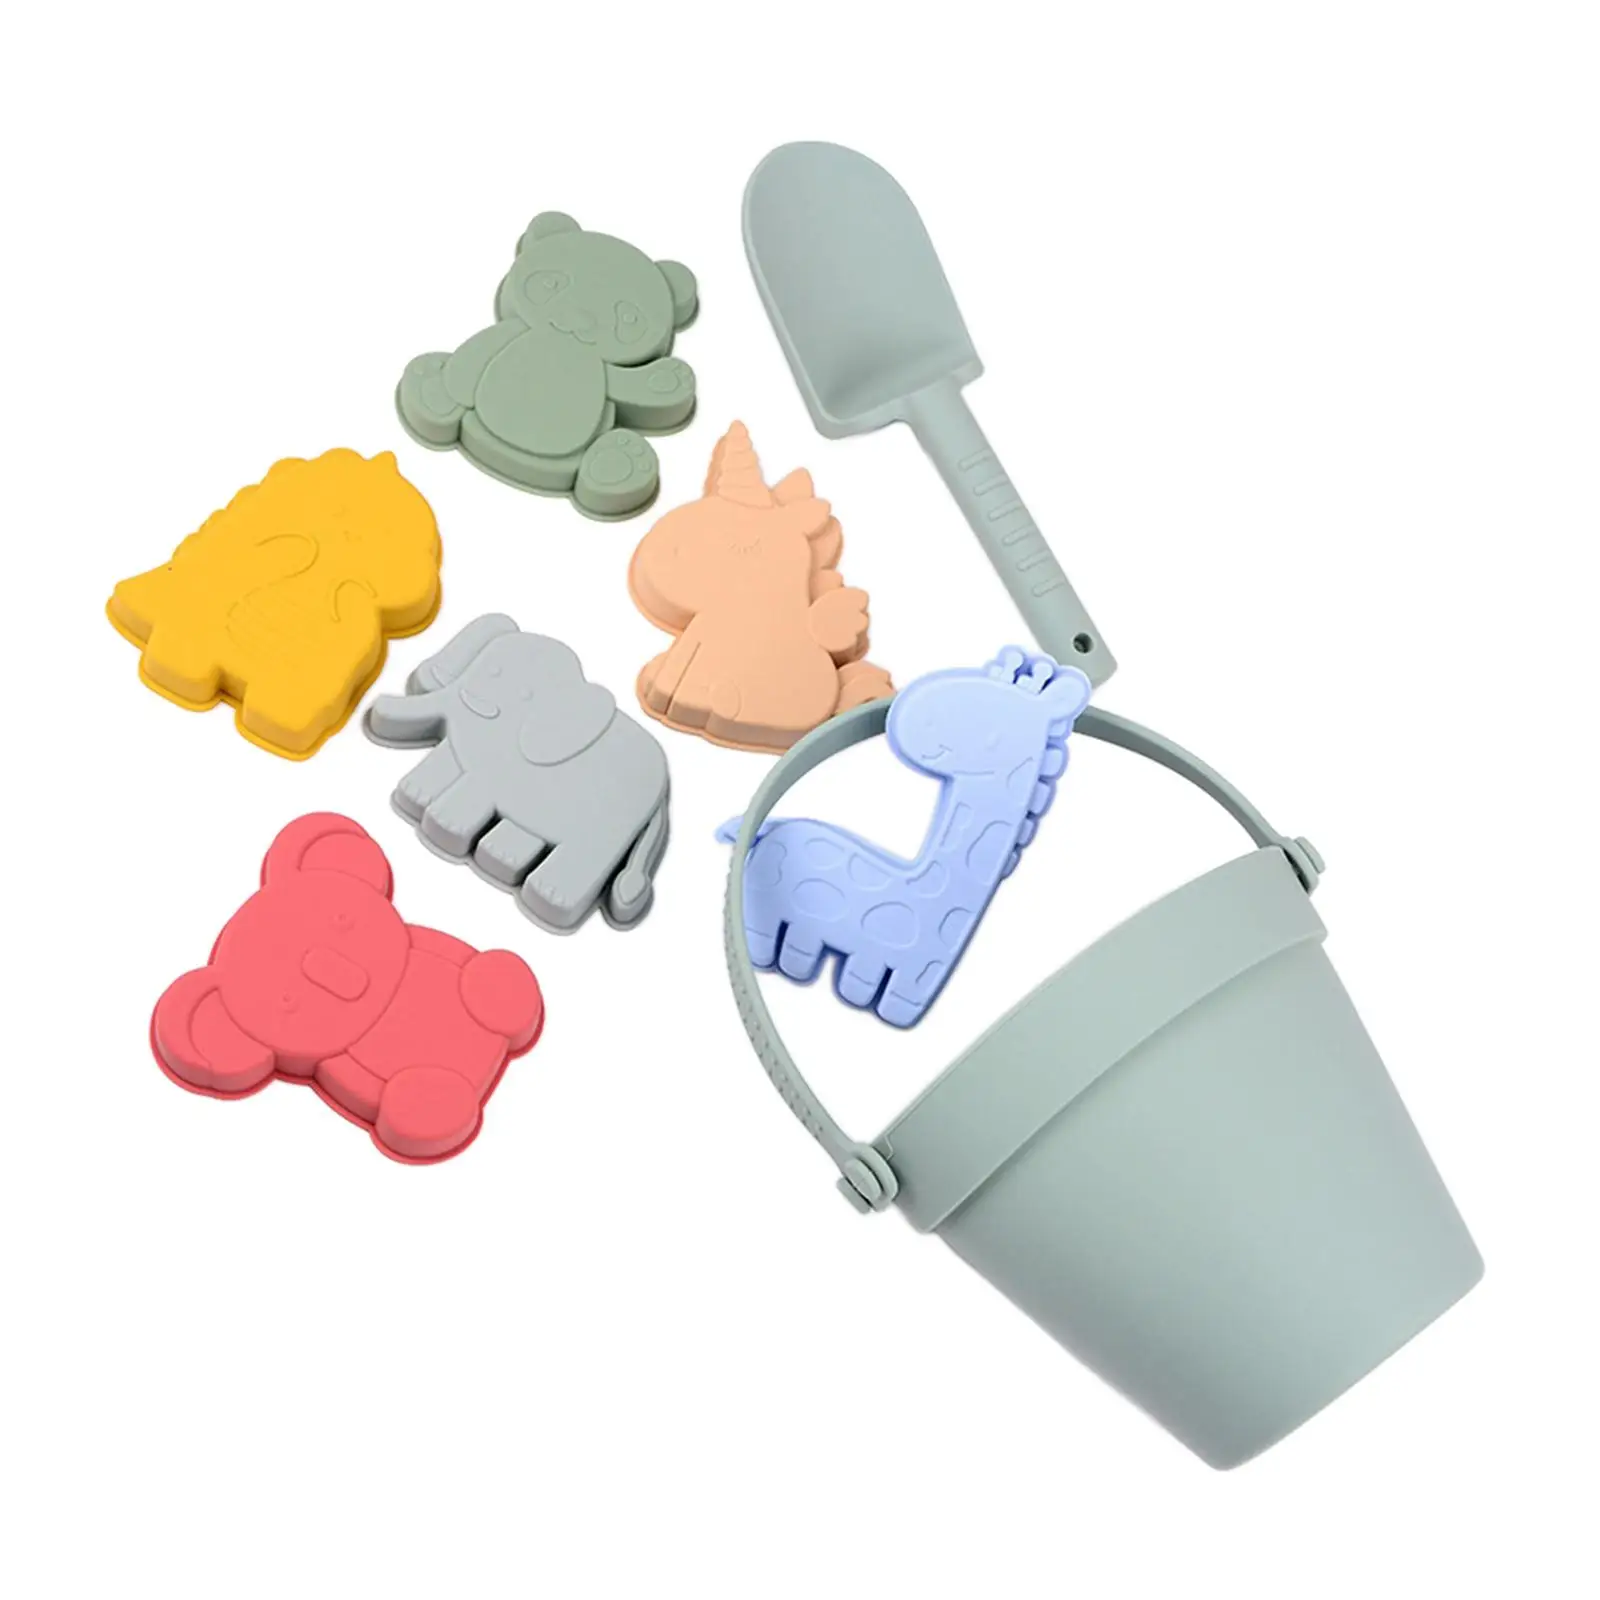 8 Pieces Beach Bucket and Spade Set for Toddlers Beach Toy Travel Beach Toy Kits for Travel Playground Beach Seaside Boys Girls